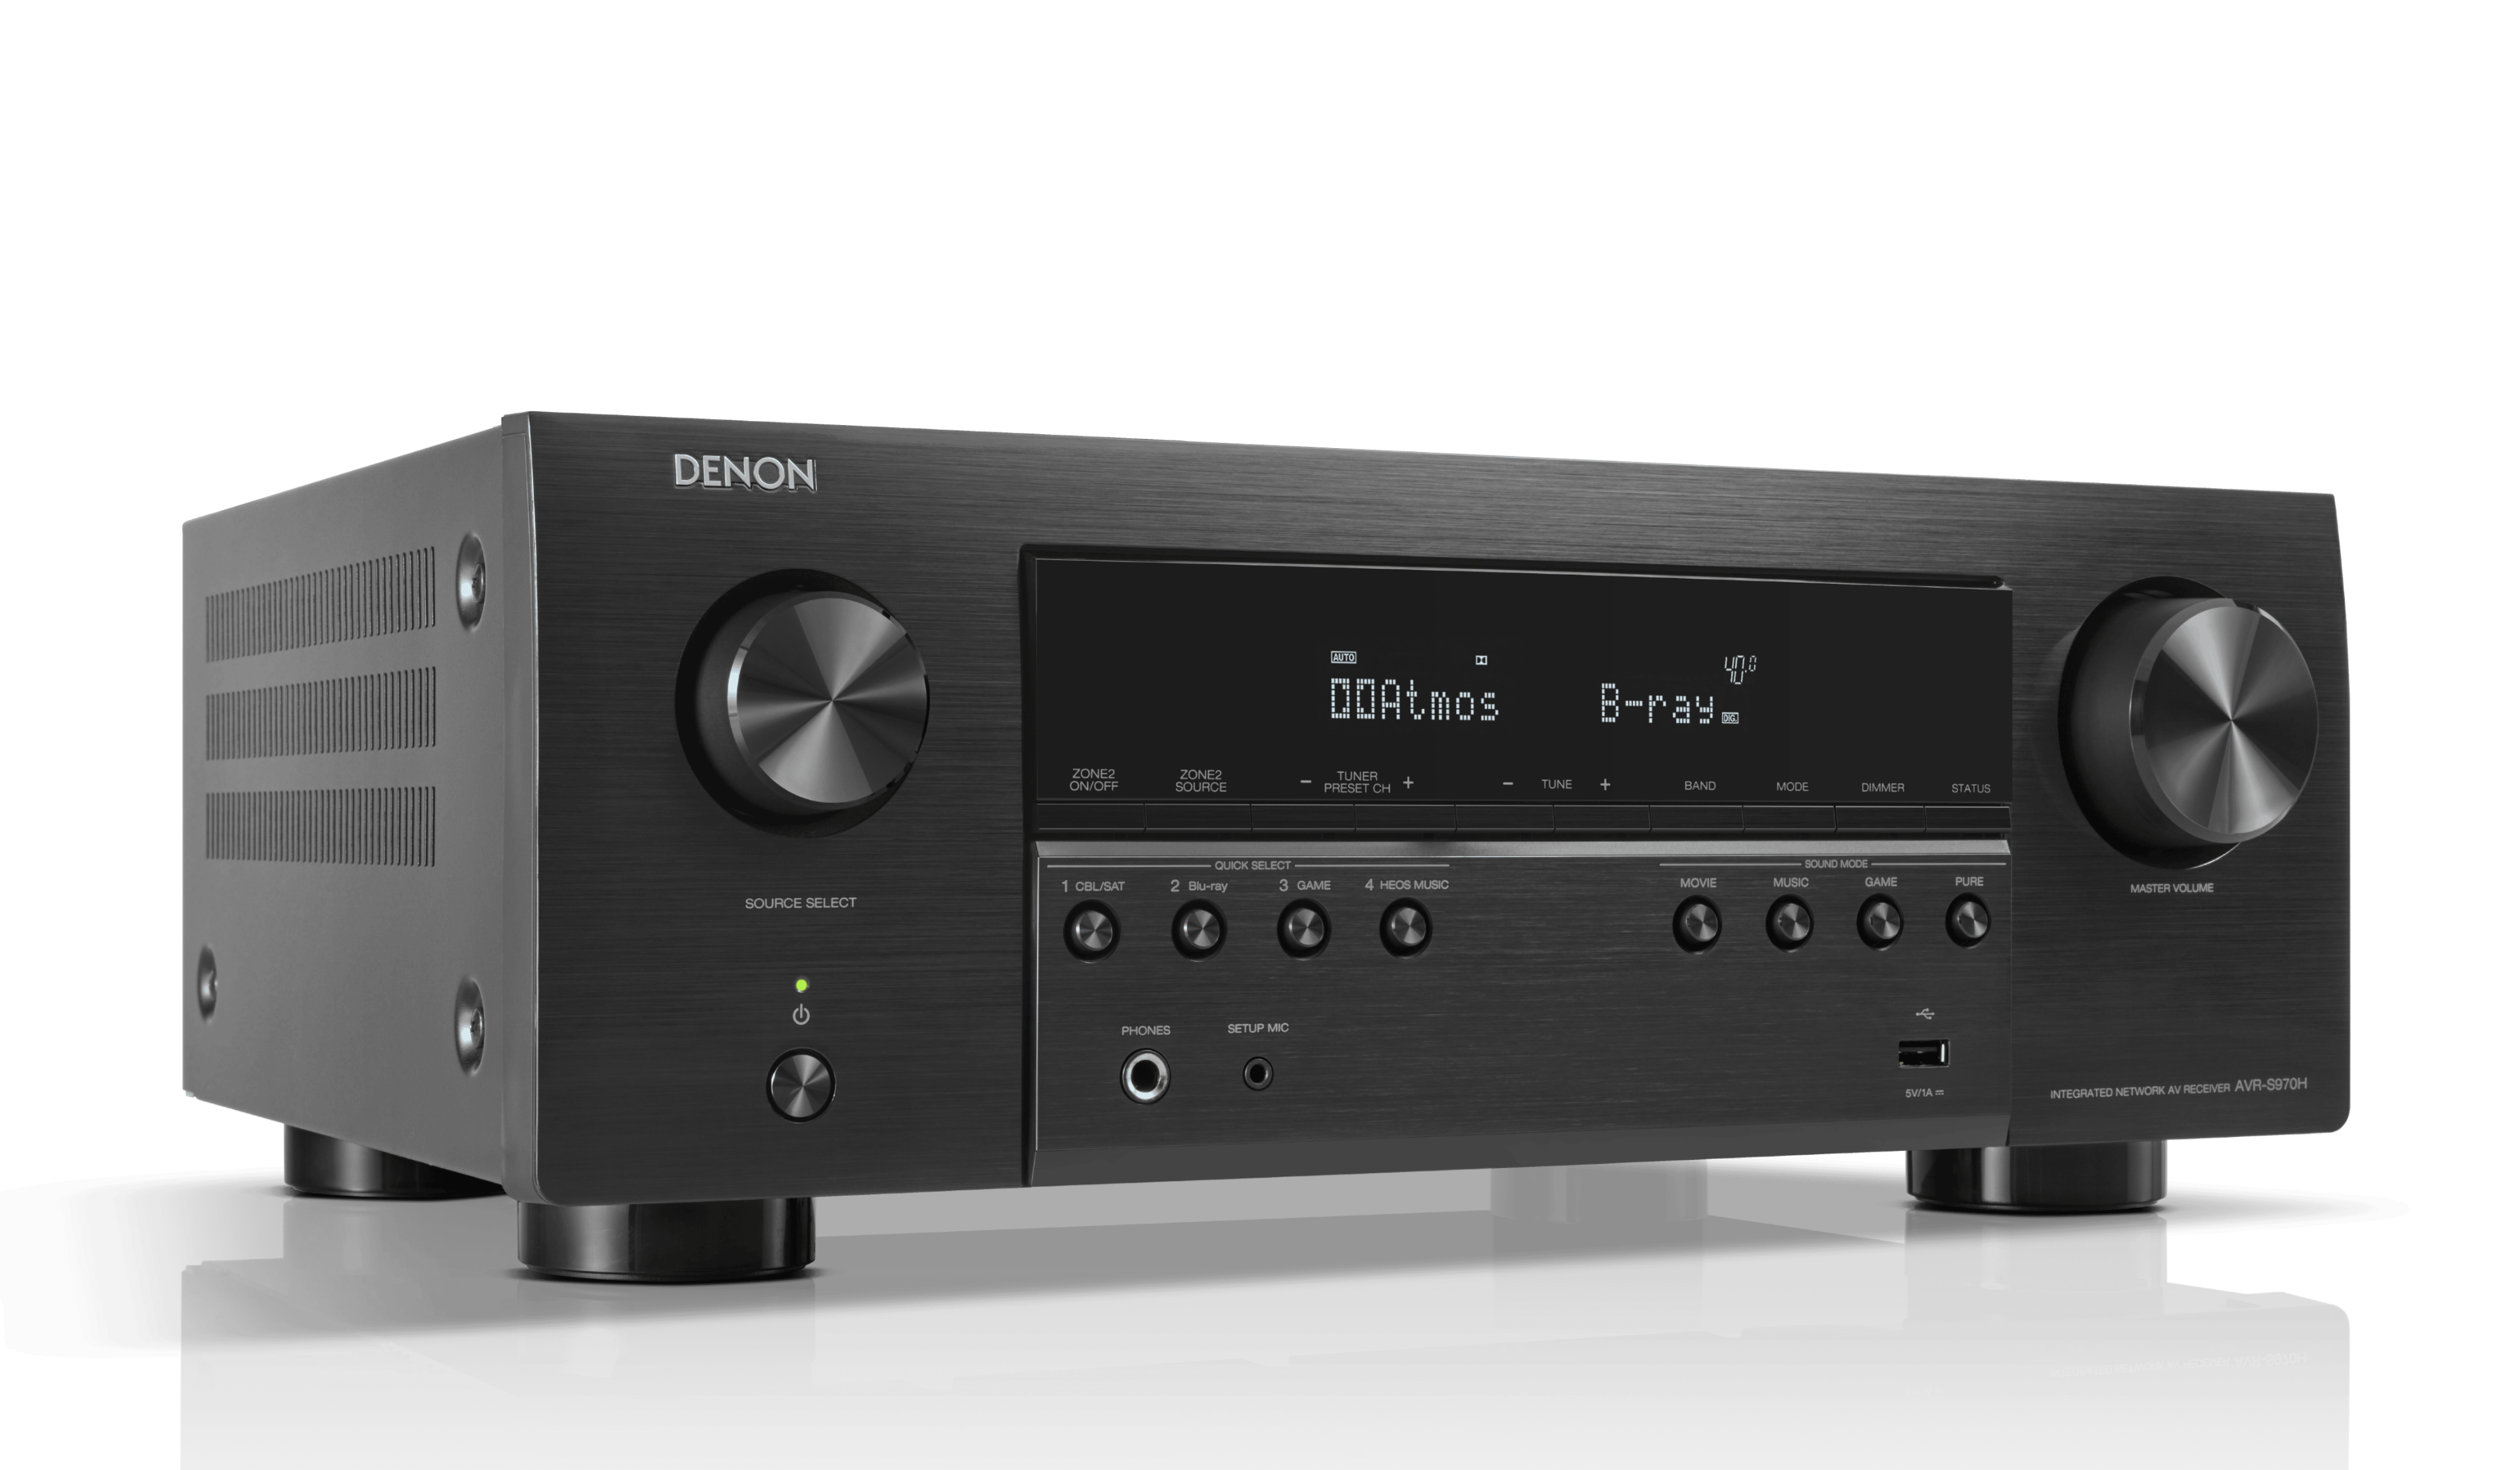 3D - and Denon receiver audio experience 7.2 US | from 8K - a video AVR-S970H channel